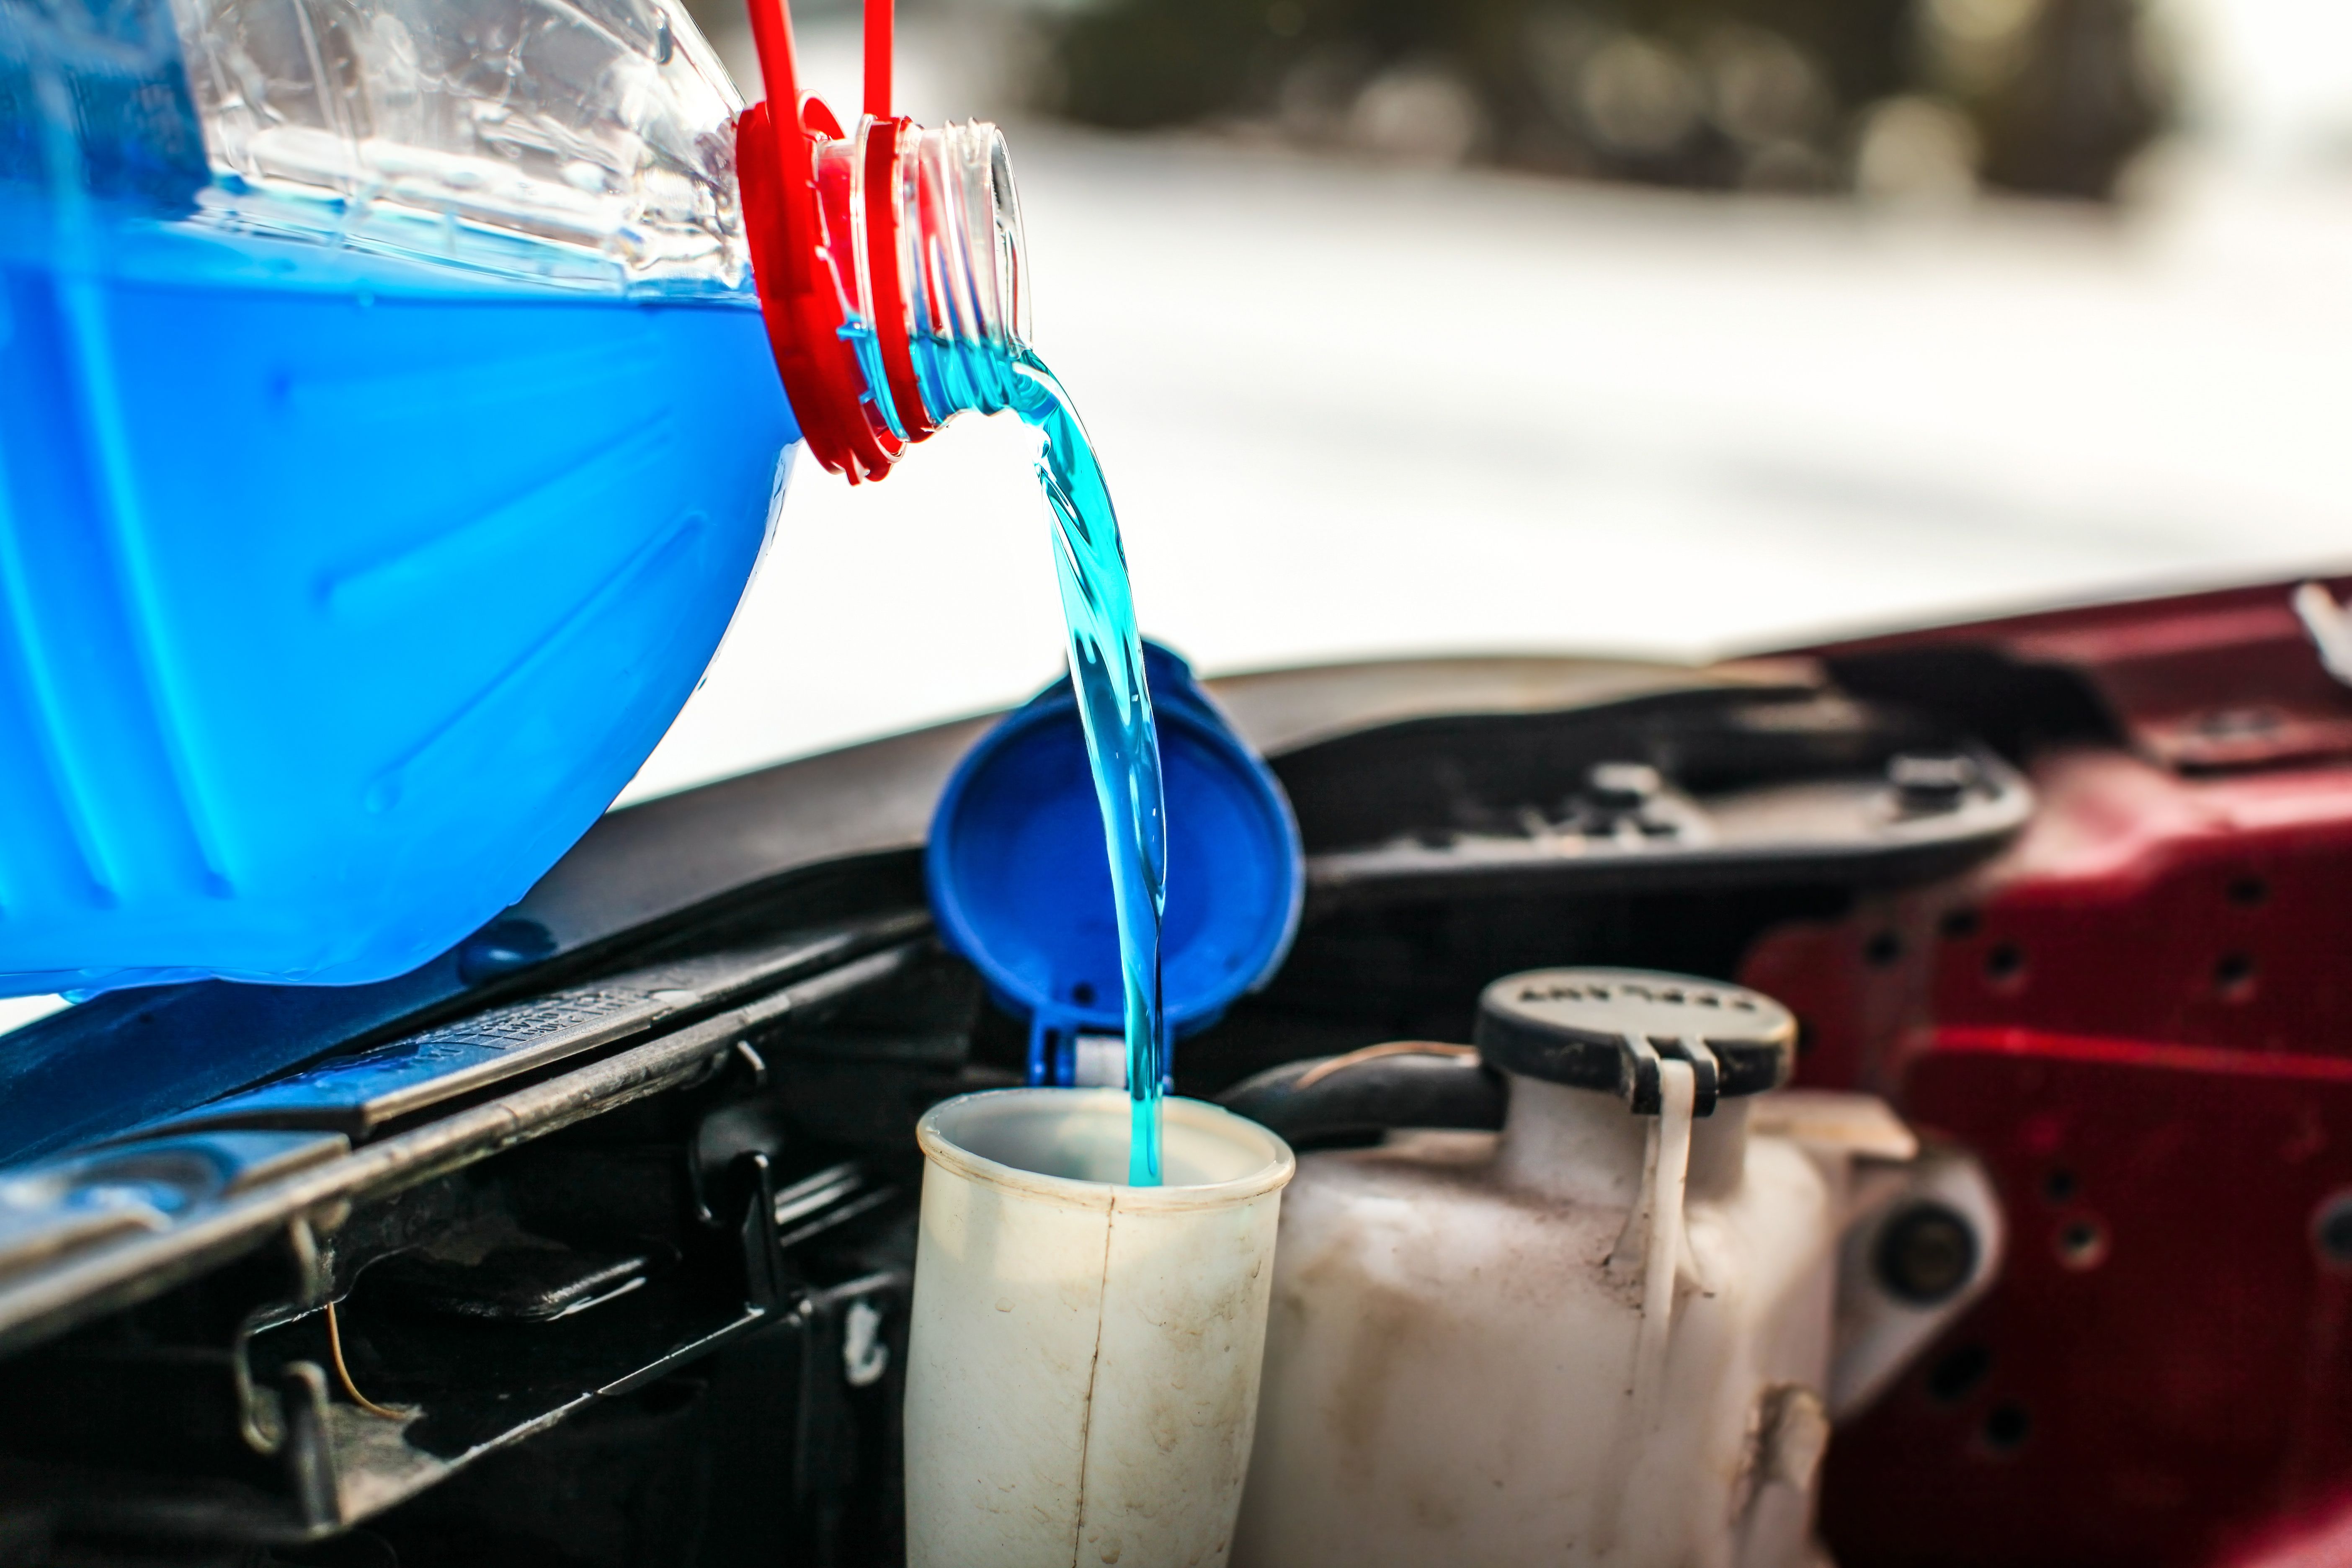 Antifreeze vs Coolant - What's the Difference